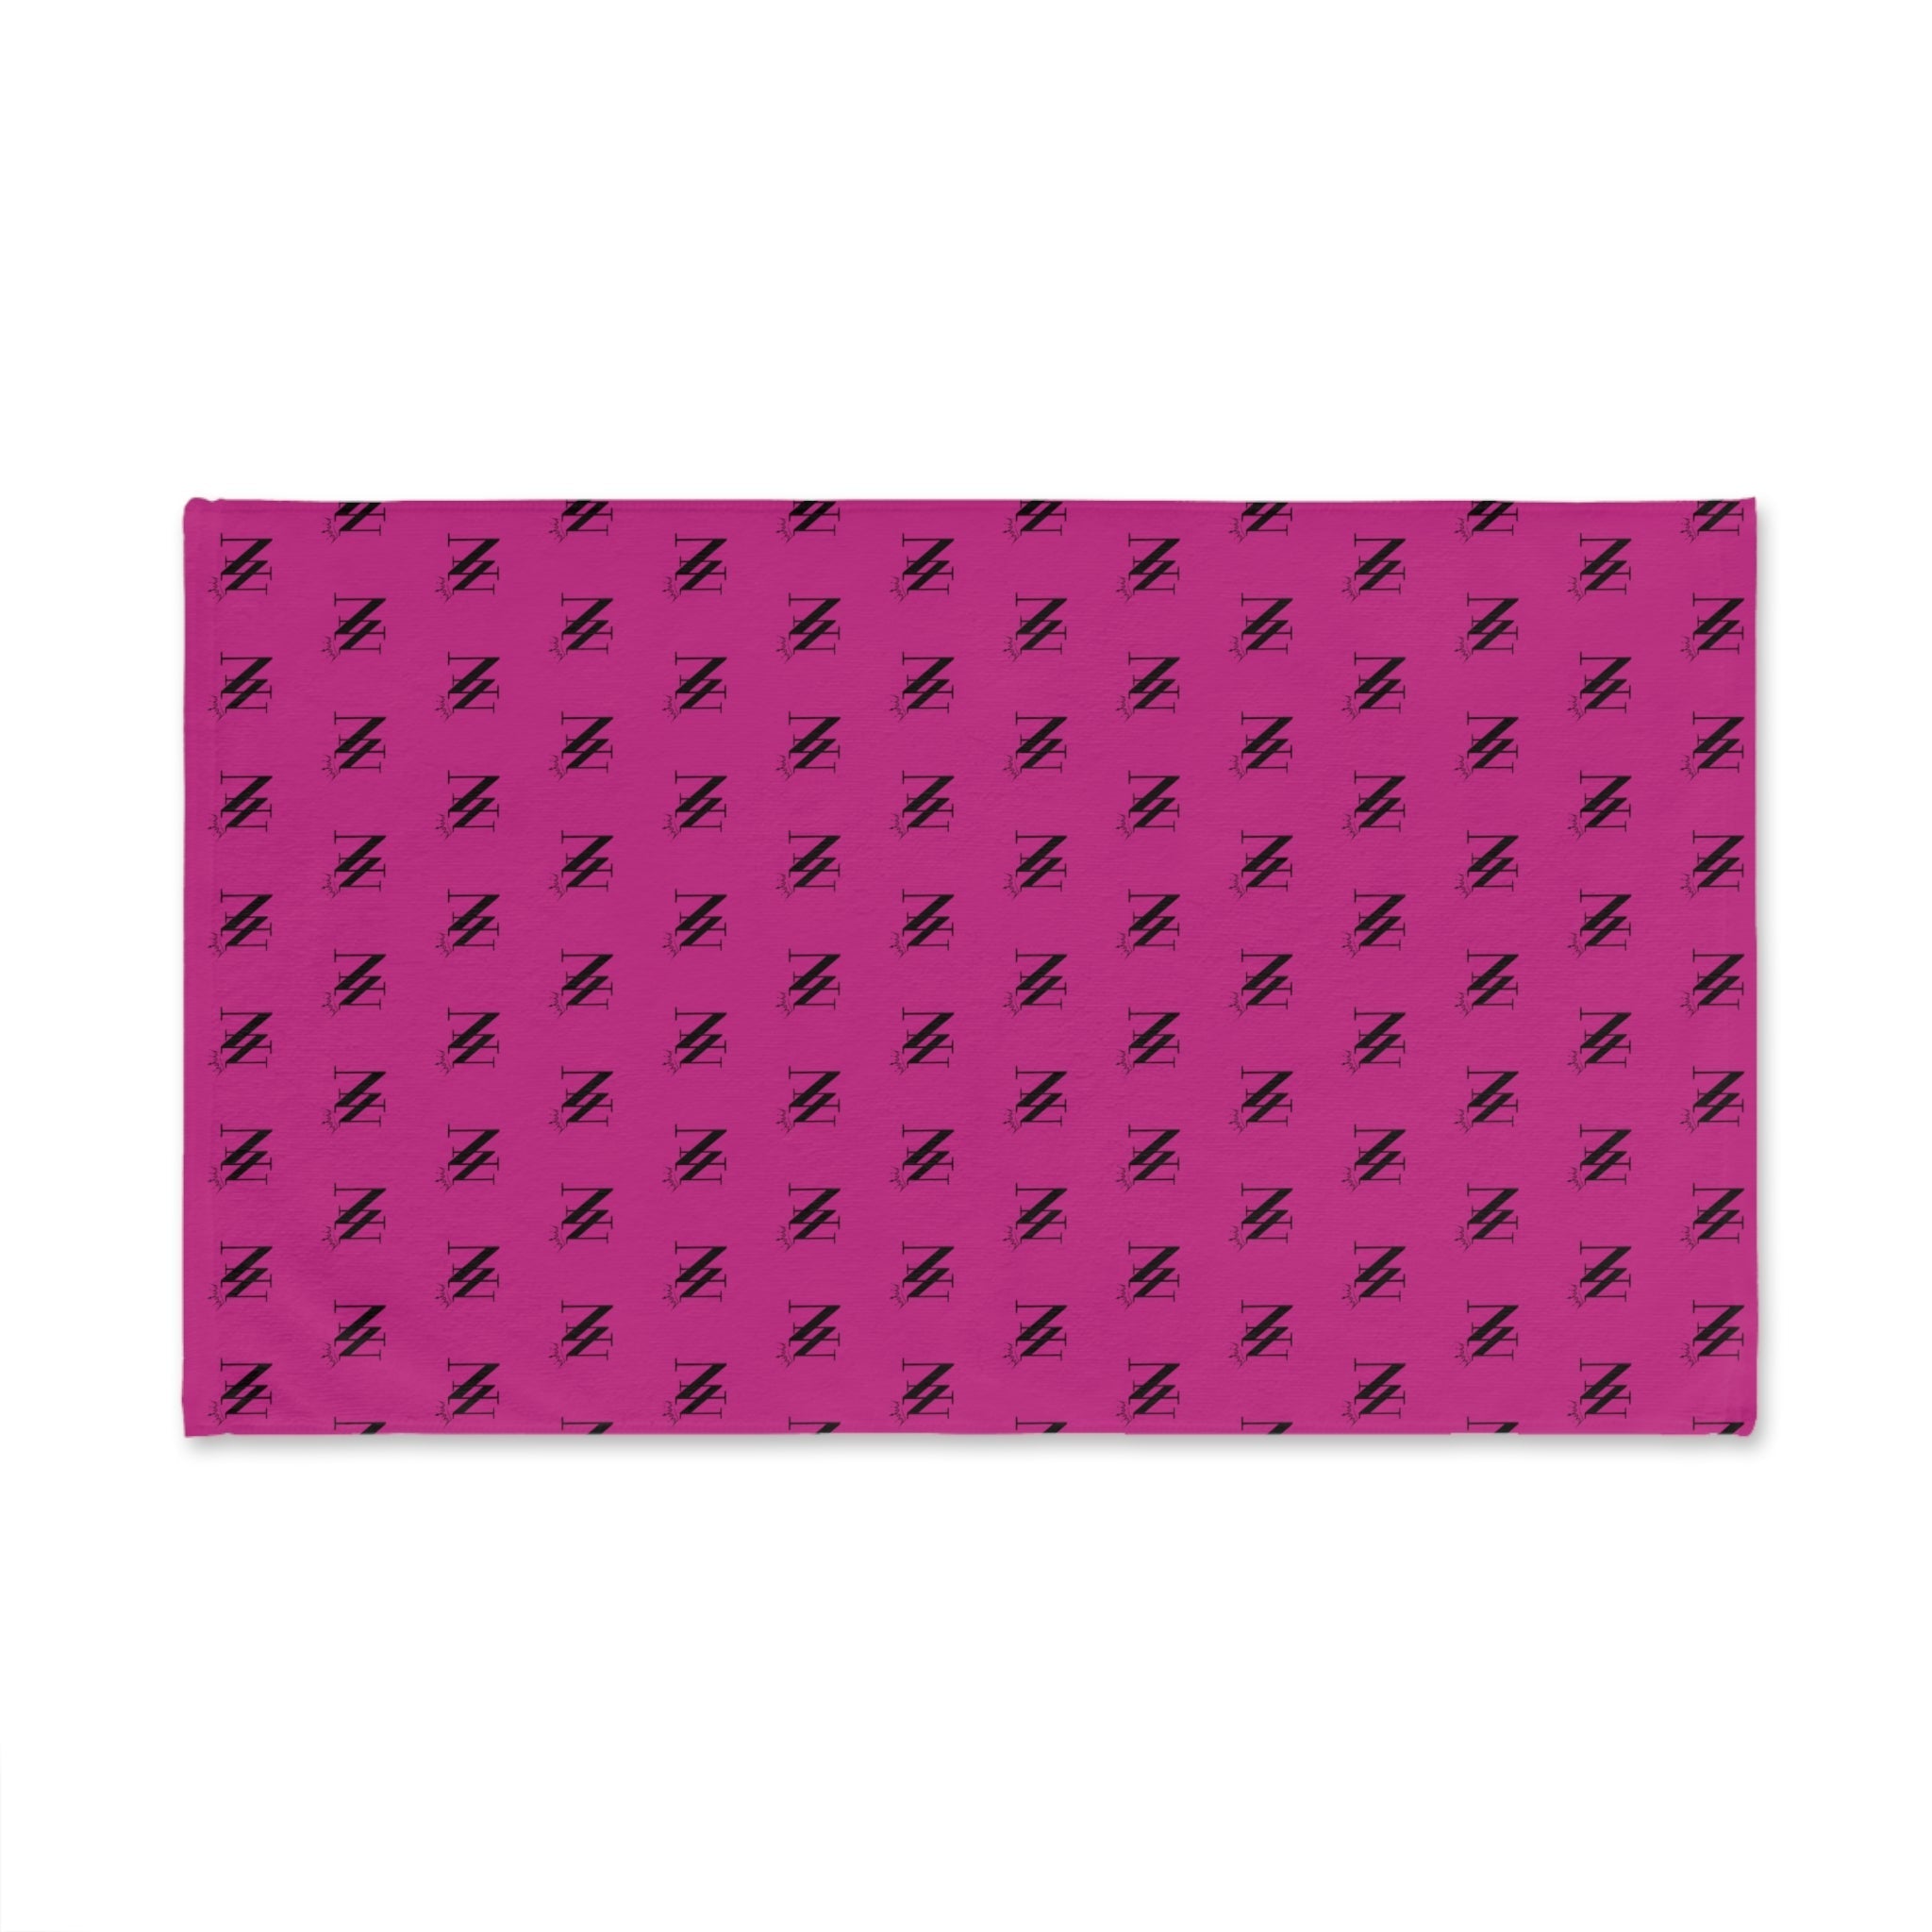 Pattern  Logo  Fuscia | Funny Gifts for Men - Gifts for Him - Birthday Gifts for Men, Him, Husband, Boyfriend, New Couple Gifts, Fathers & Valentines Day Gifts, Hand Towels NECTAR NAPKINS